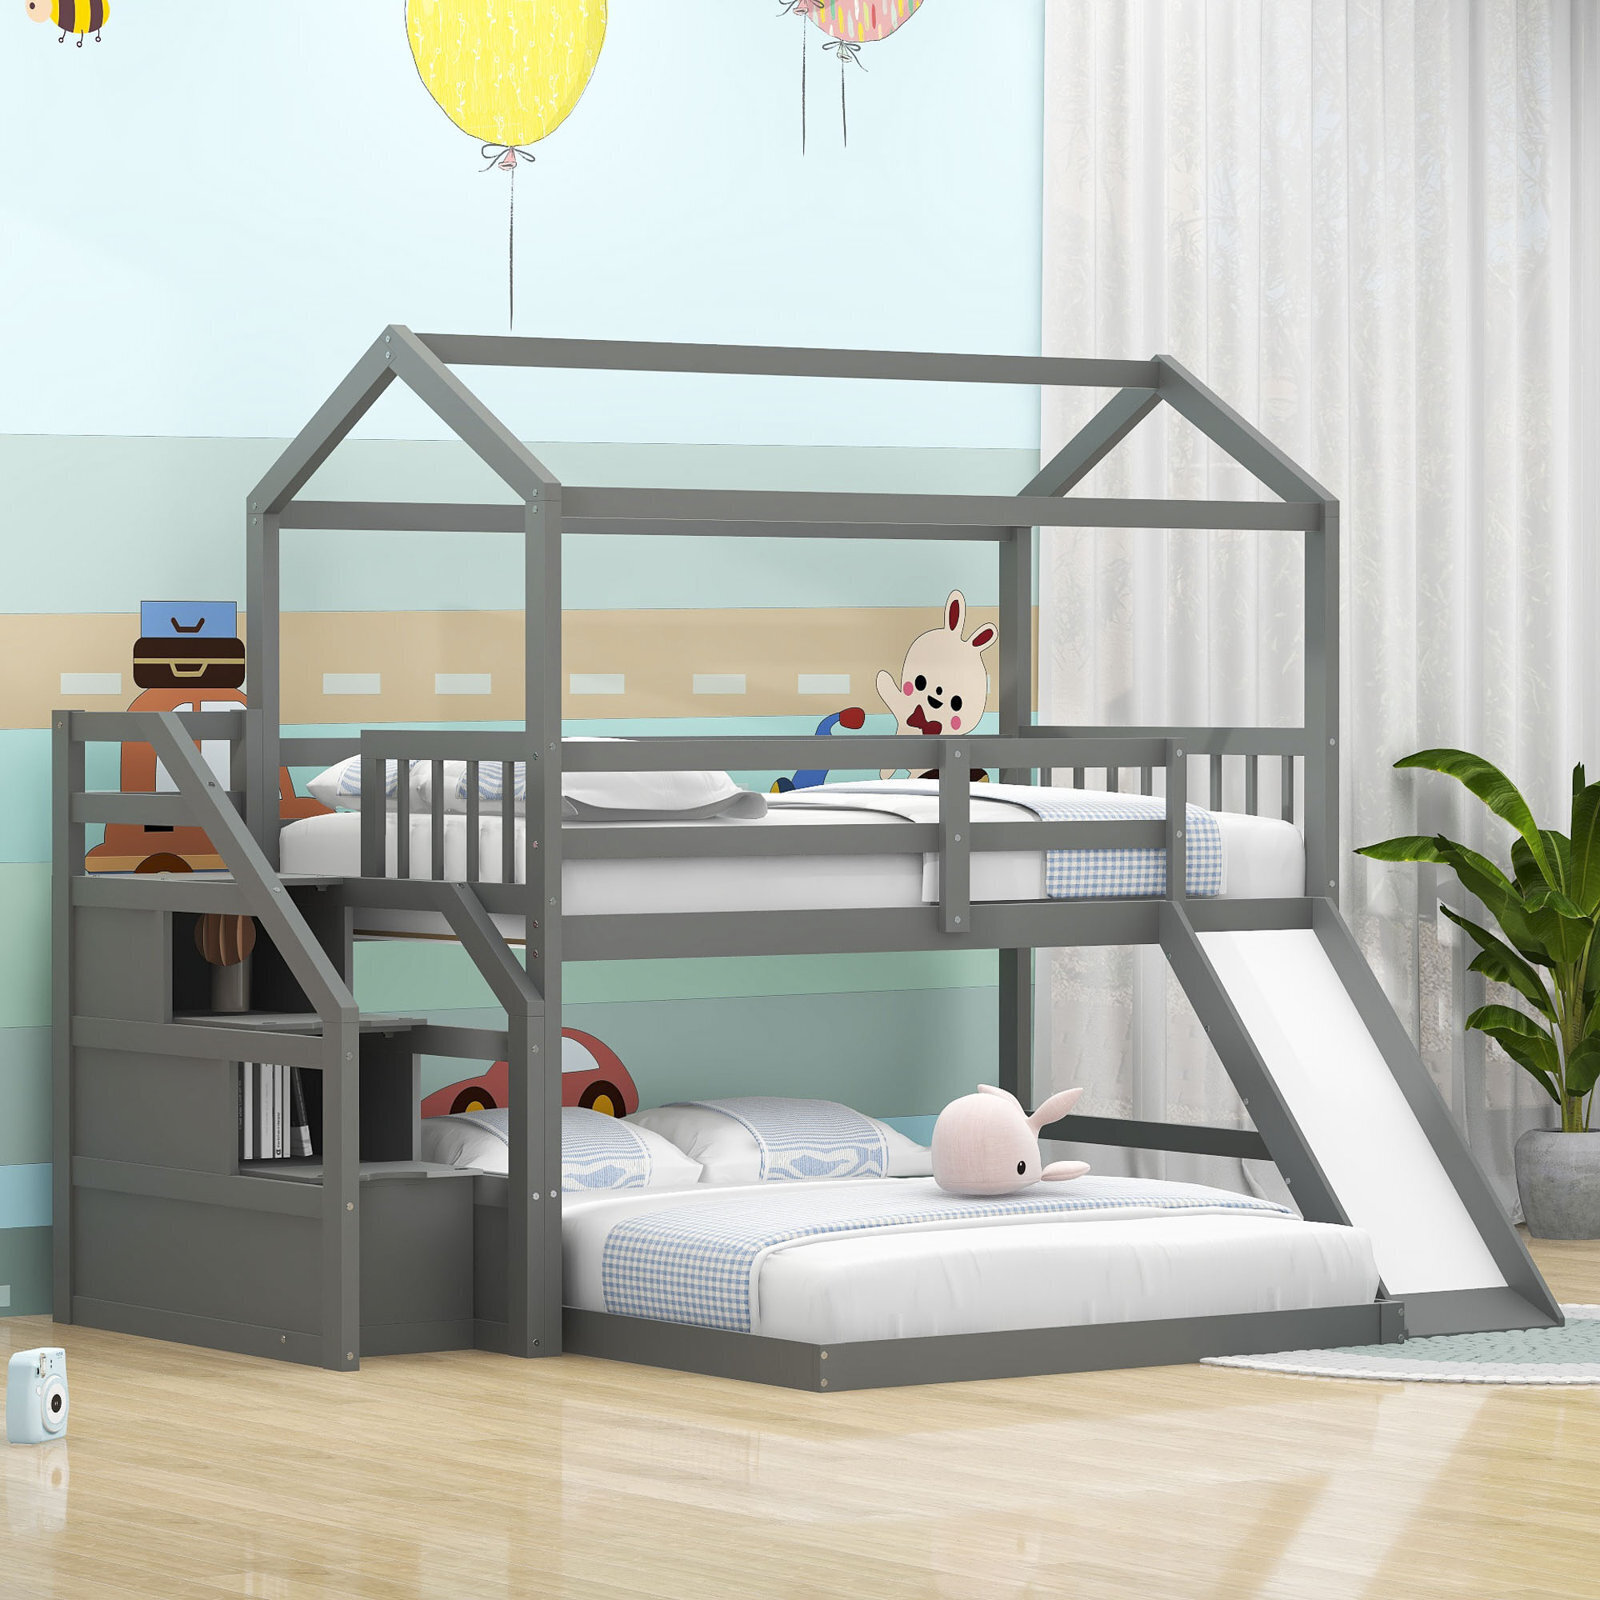 Toddler Bunk Bed With Slide